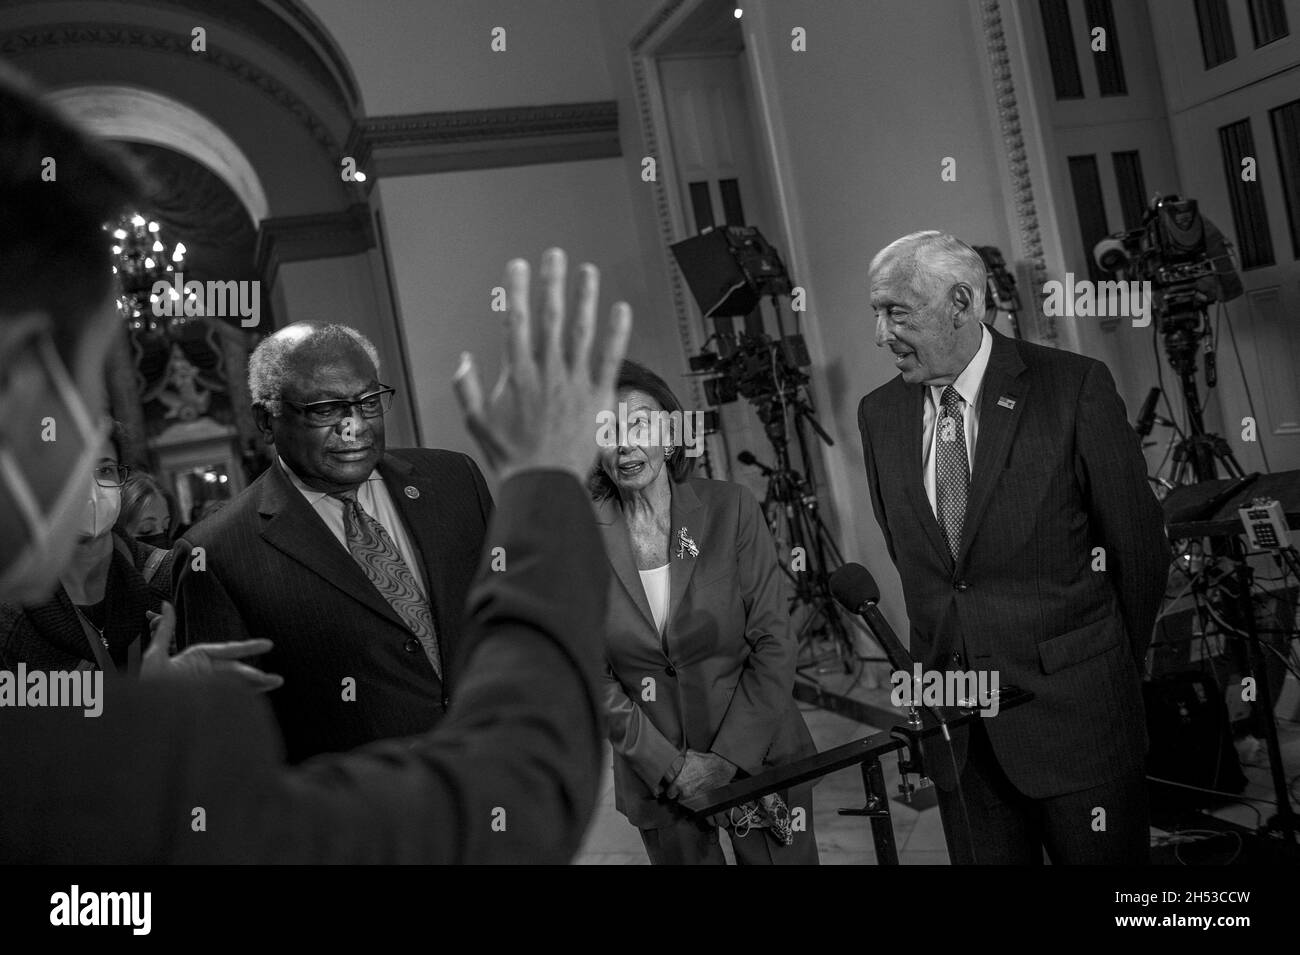 Speaker of the United States House of Representatives Nancy Pelosi (Democrat of California), center, is joined by United States House Majority Whip James Clyburn (Democrat of South Carolina), left, and United States House Majority Leader Steny Hoyer (Democrat of Maryland), right, to offer remarks to reporters as the House of Representatives prepares to vote on the Build Back Better and bipartisan Infrastructure bills at the US Capitol in Washington, DC, USA, on Friday, November 5, 2021. Photo by Rod Lamkey / CNP Photo/ABACAPRESS.COM Stock Photo